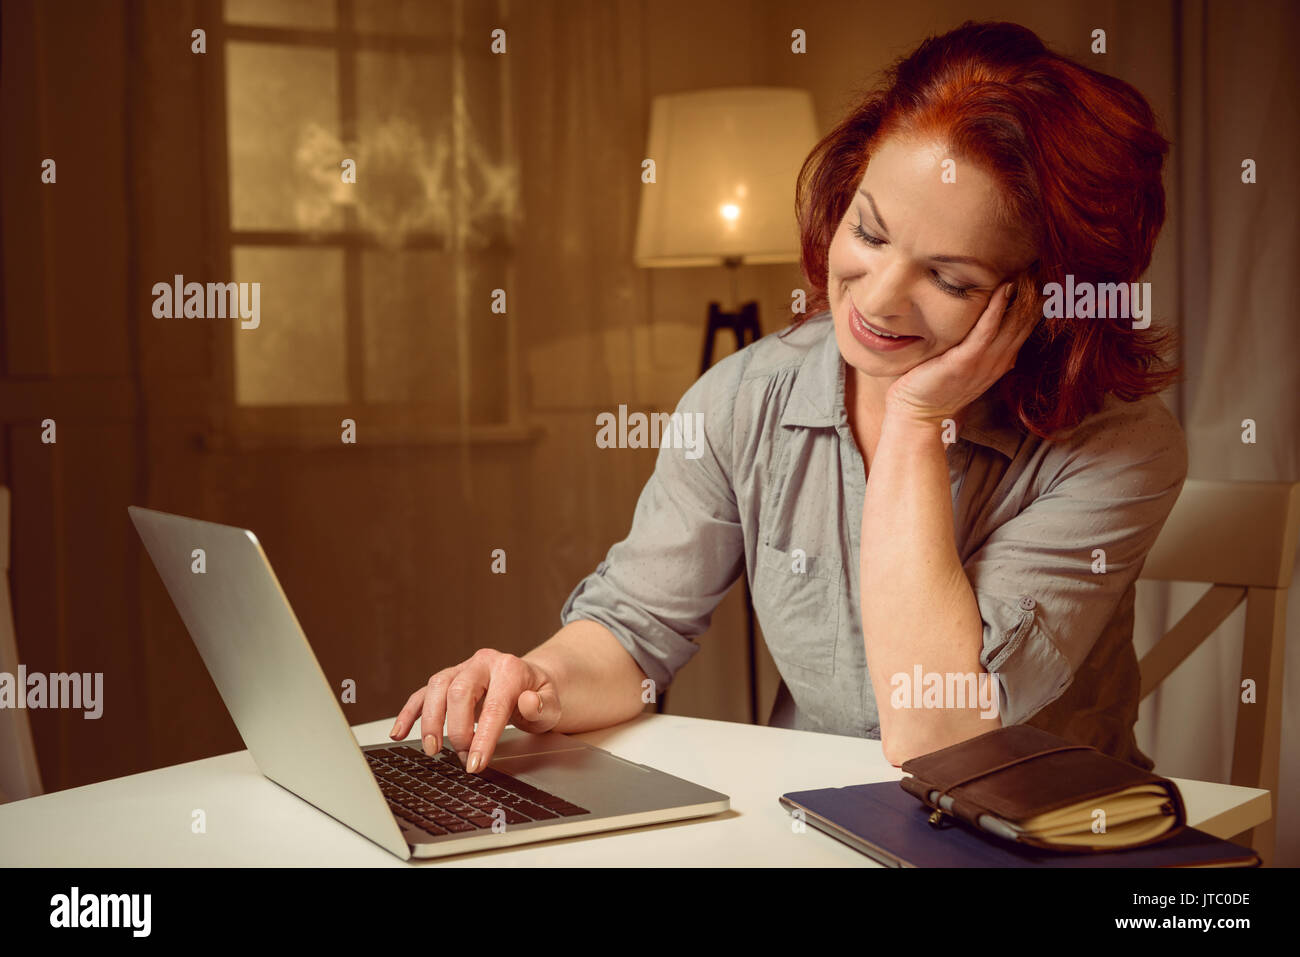 mature red hair woman working on laptop while sitting at table at home Stock Photo